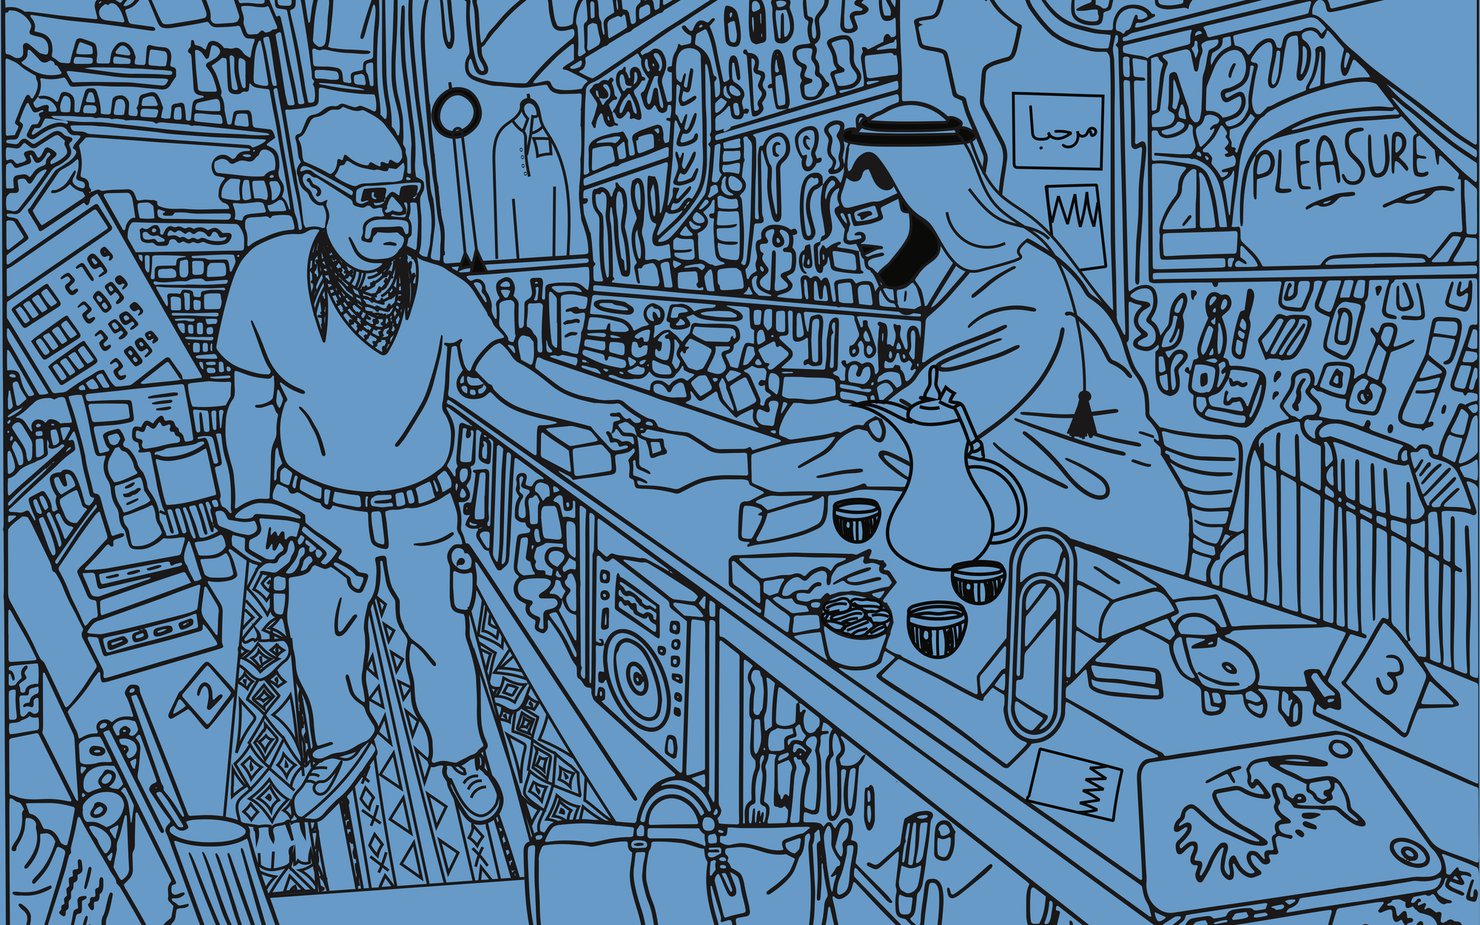 Line drawing of a traditionally dressed shopkeeper selling to a customer from his crowded store